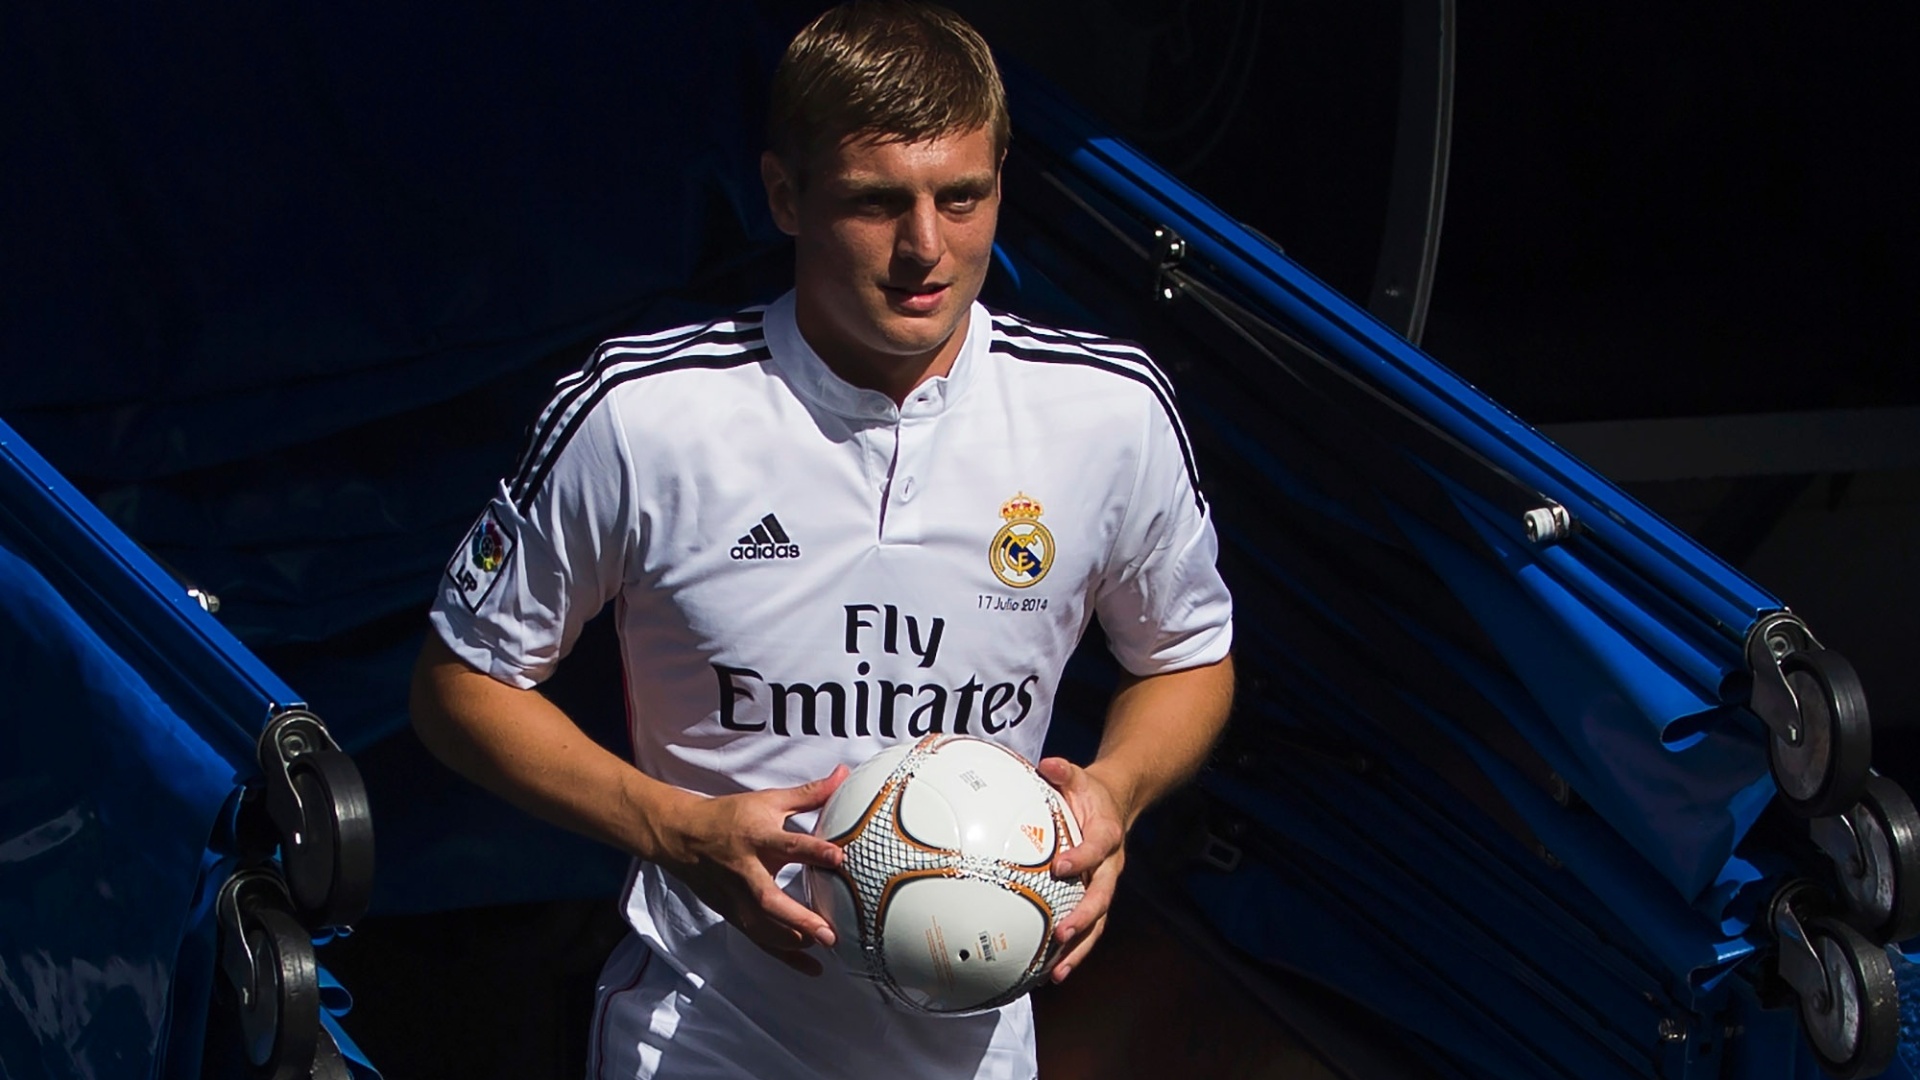 Will Toni Kroos be able to make a stand at Real Madrid's strong midfield line?